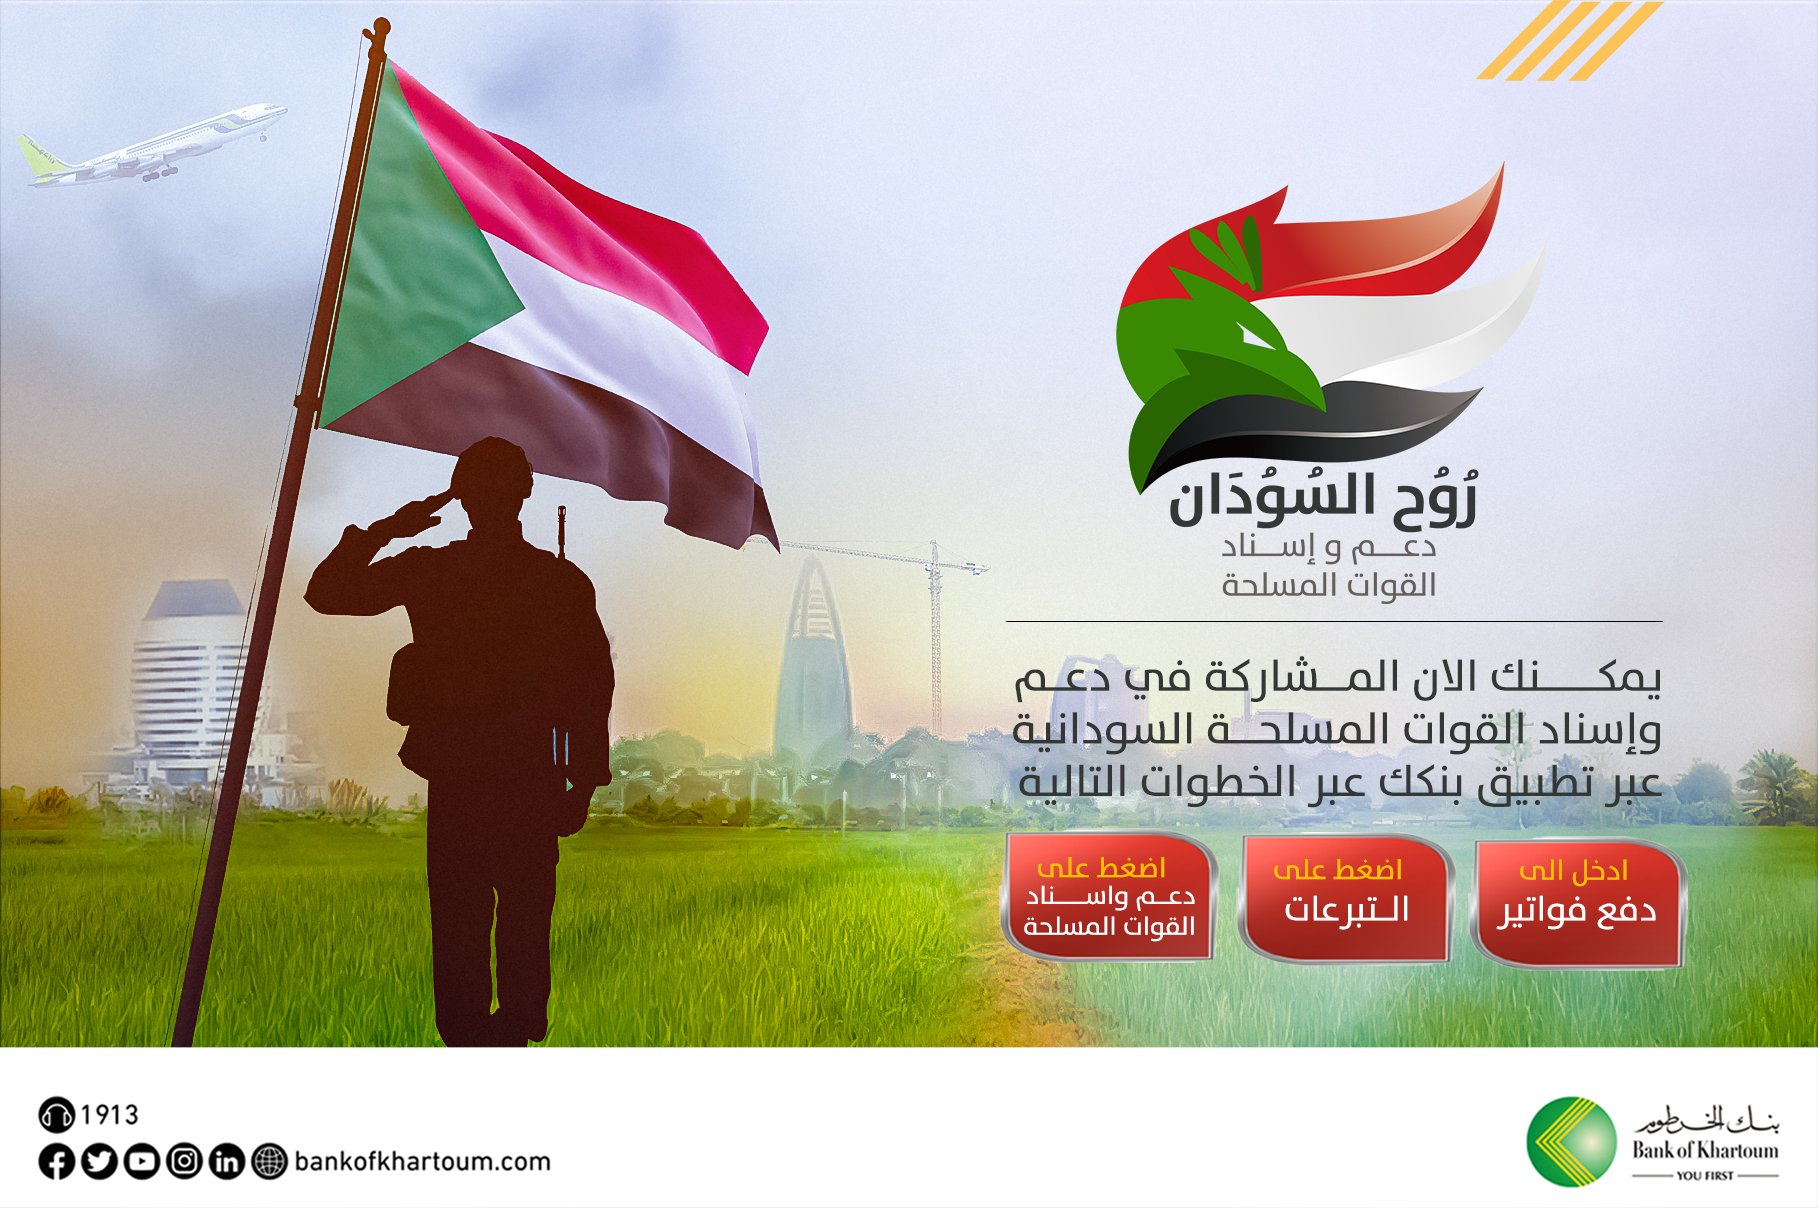 Your bank service allows citizens to support the Sudanese Armed Forces